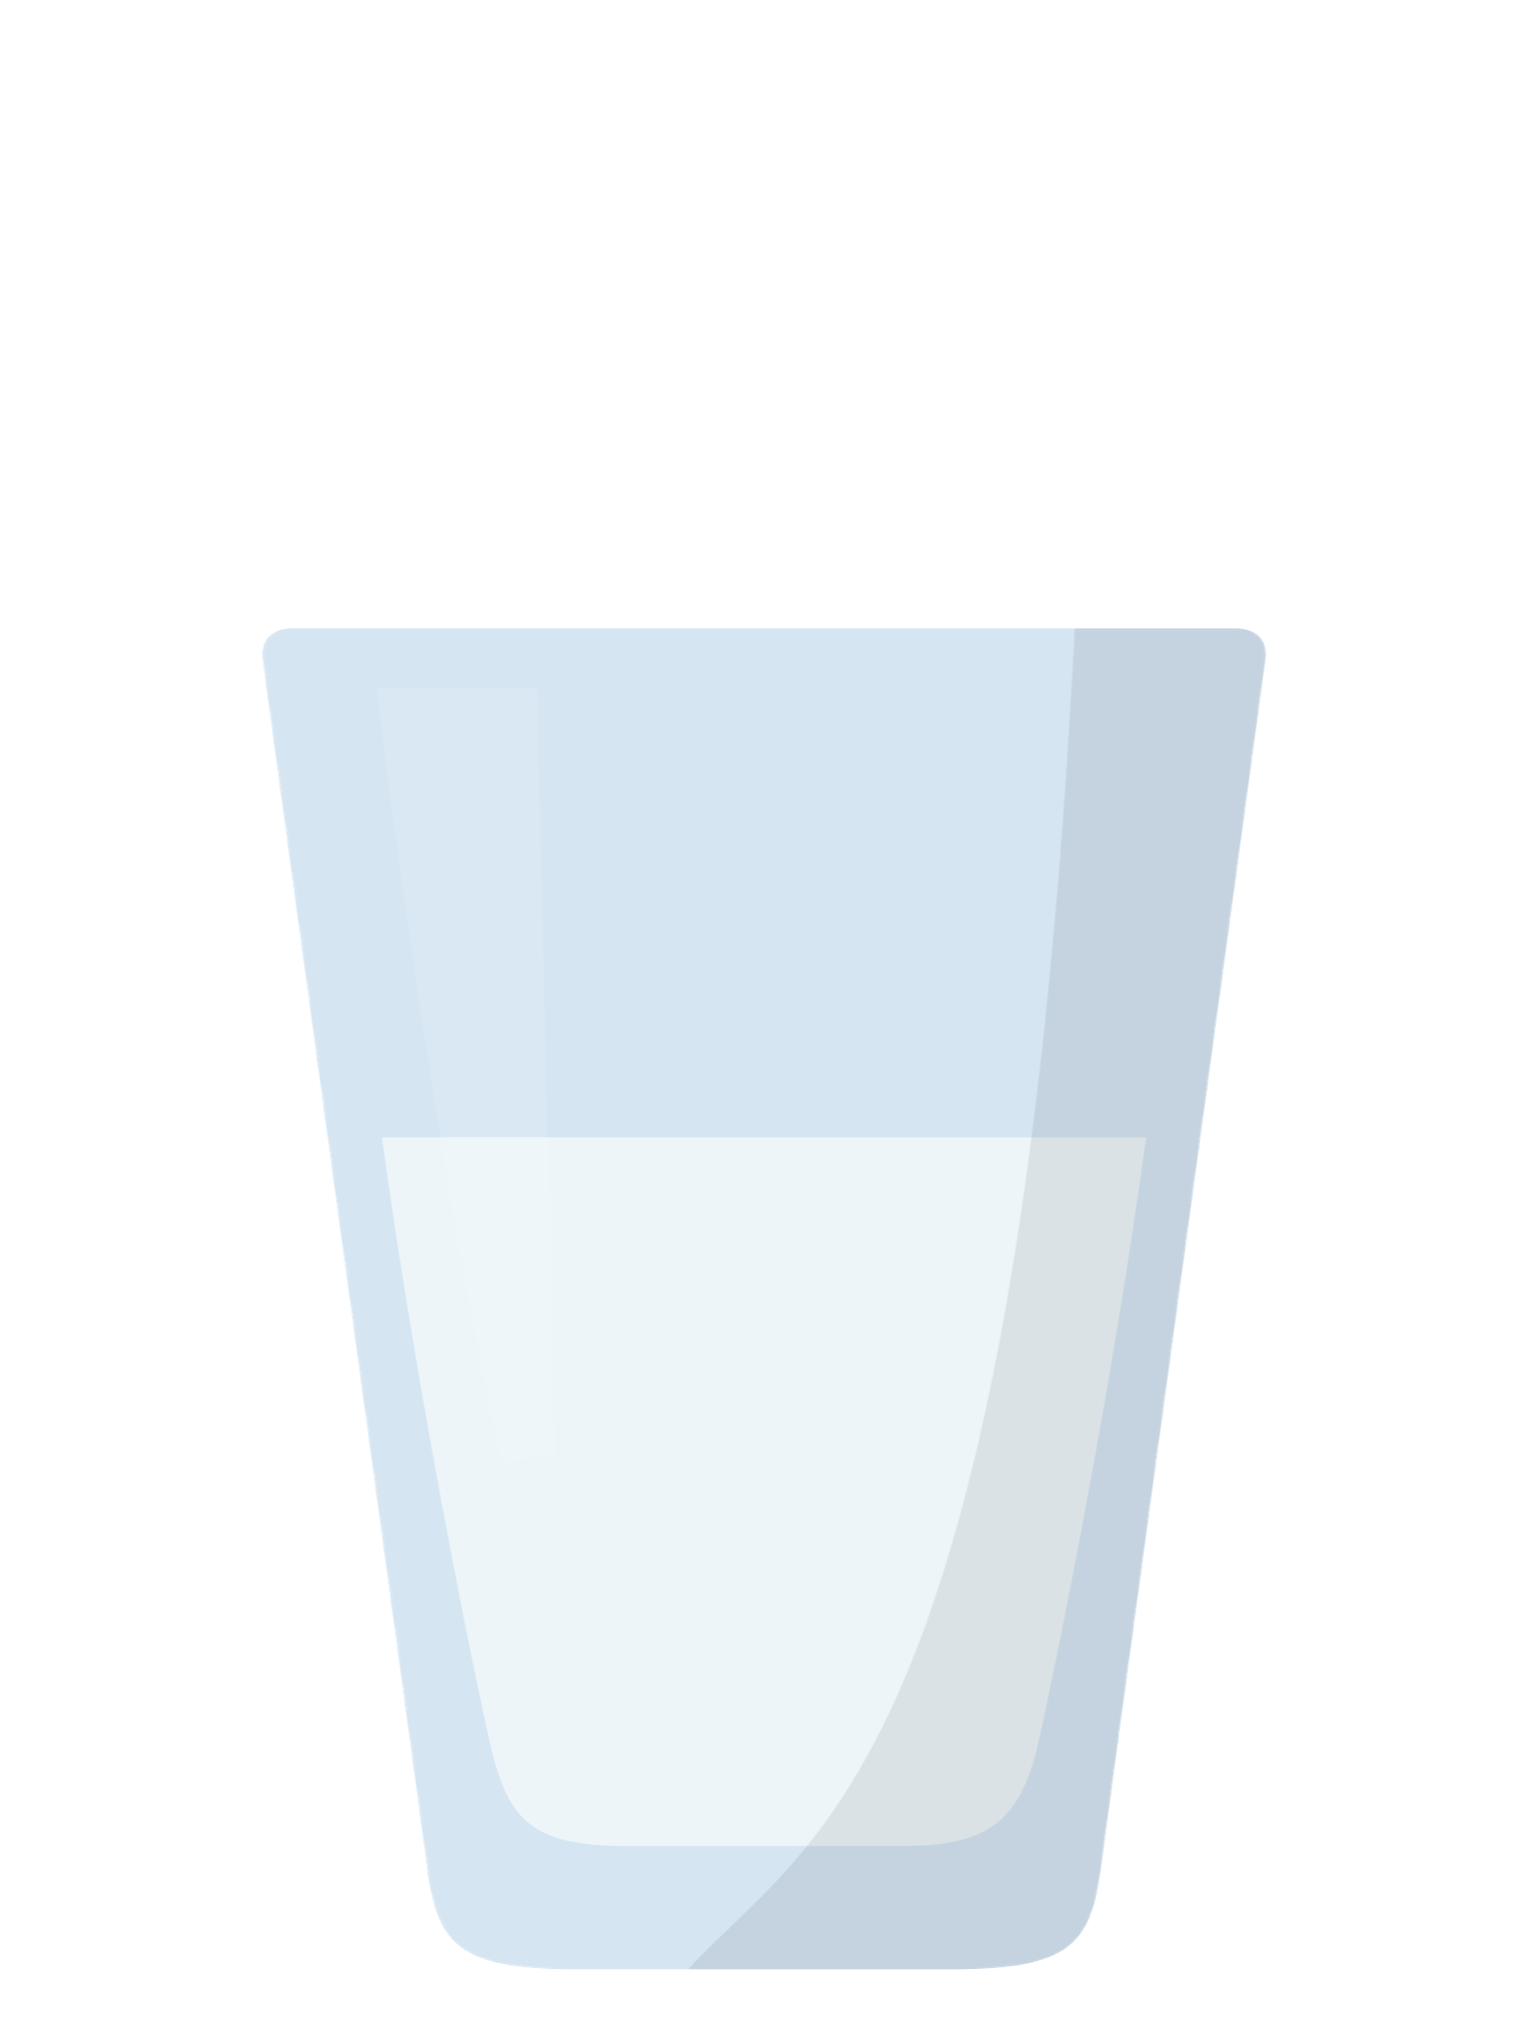 A cartoon drawing of a glass of milky water